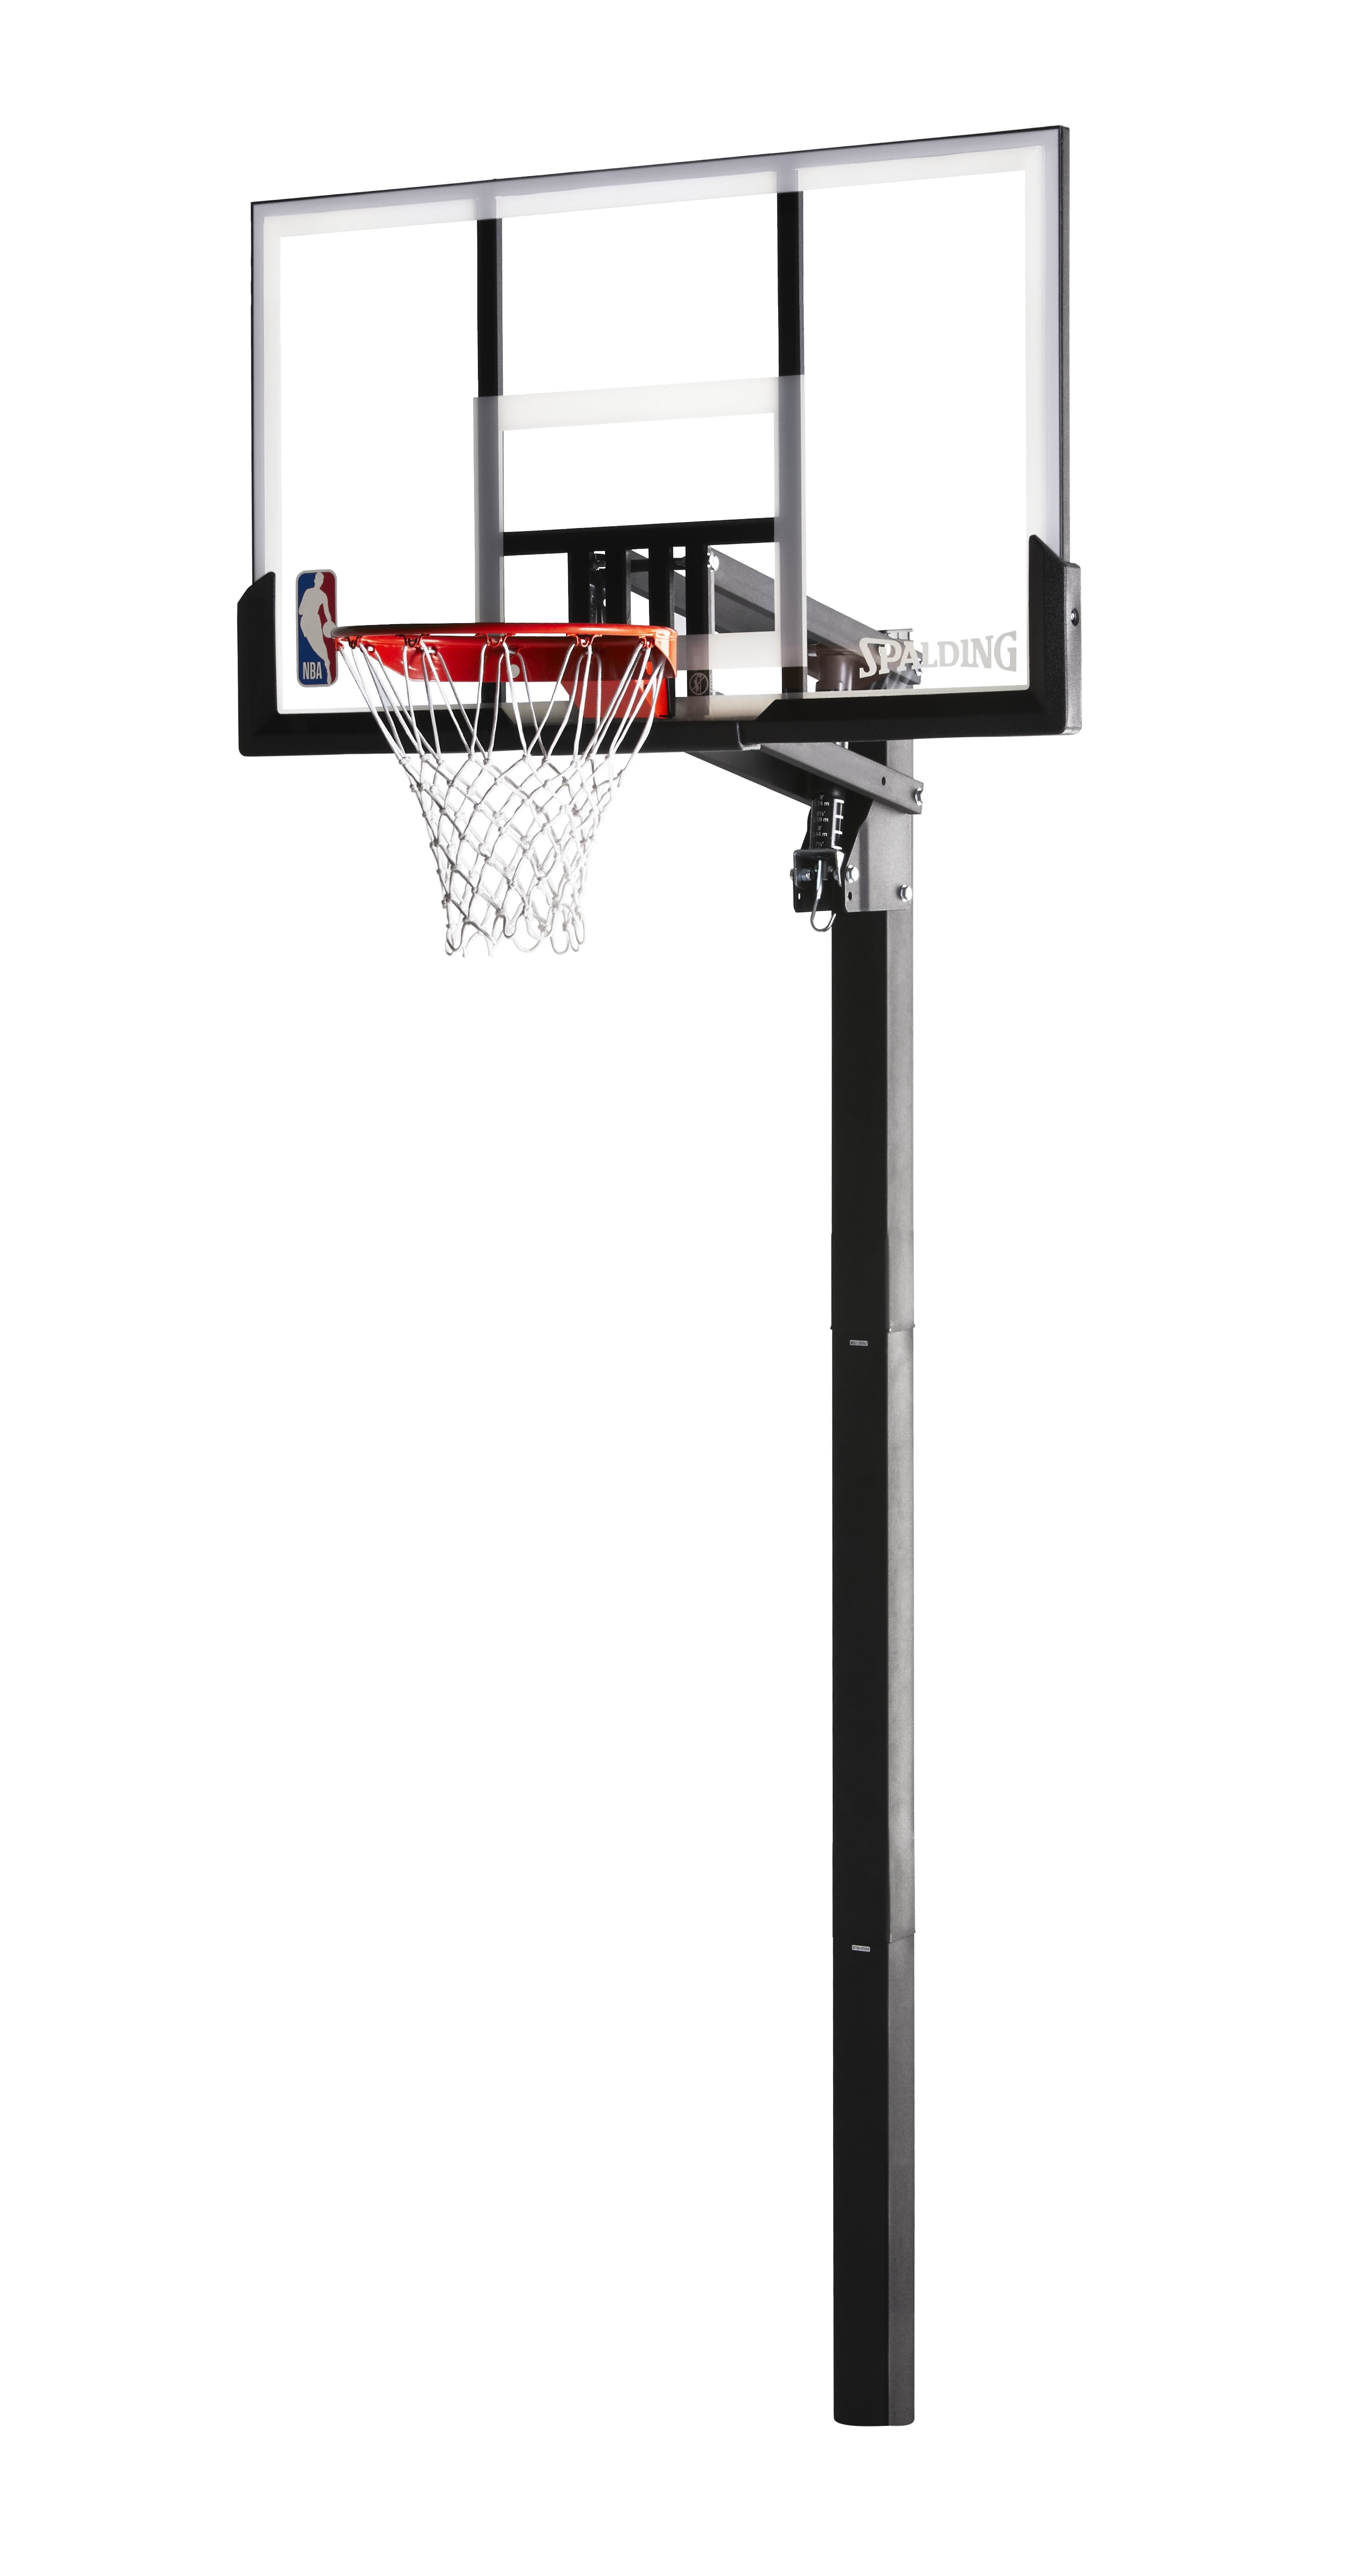 Spalding Nba 54 Acrylic In Ground, Basketball Goal In Ground